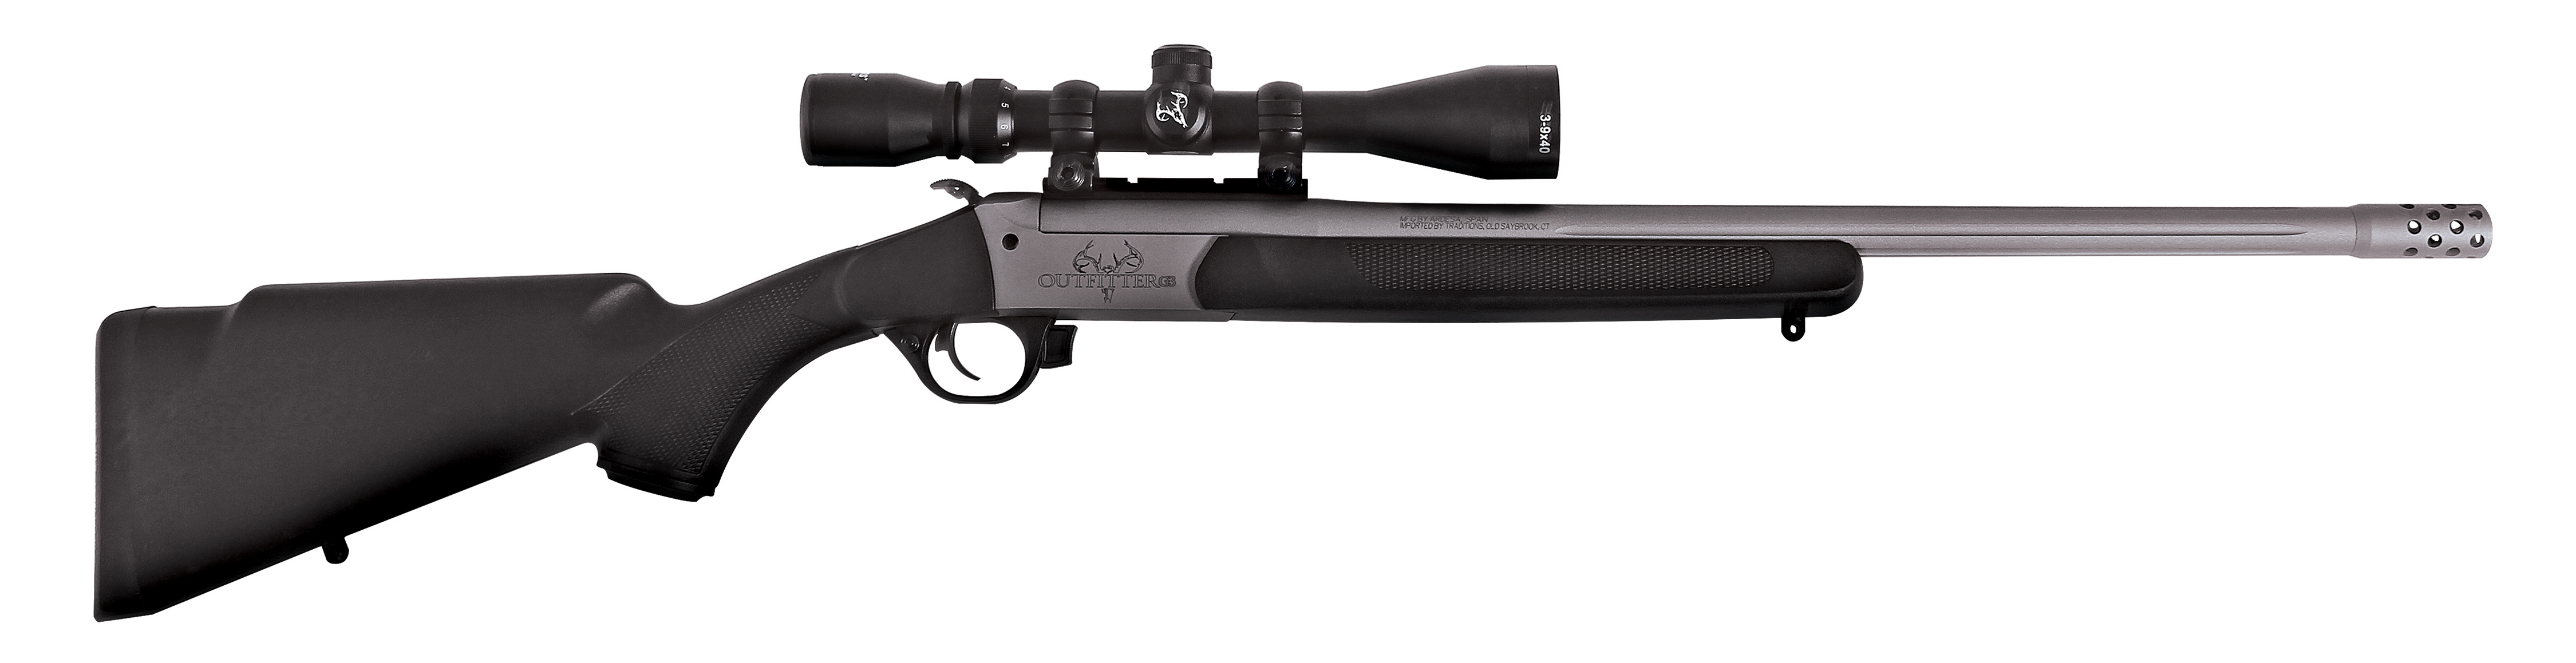 Outfitter G3 Rifle .45-70 Black/CeraKote with 3-9x40 BDC Scope